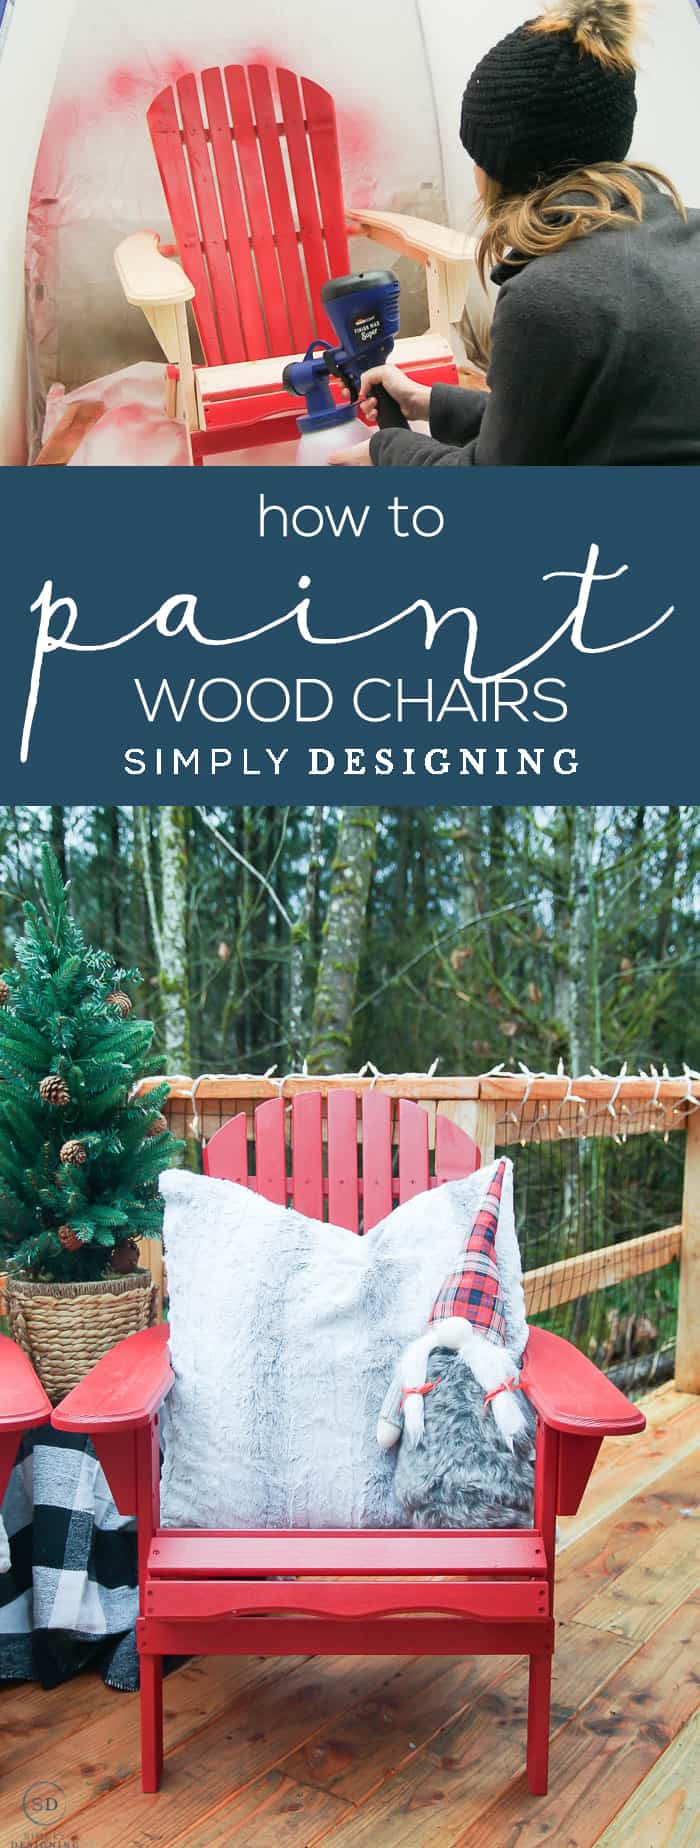 Tips and tricks for How to Paint Wood Chairs easily so that you can get a near-flawless result every single time